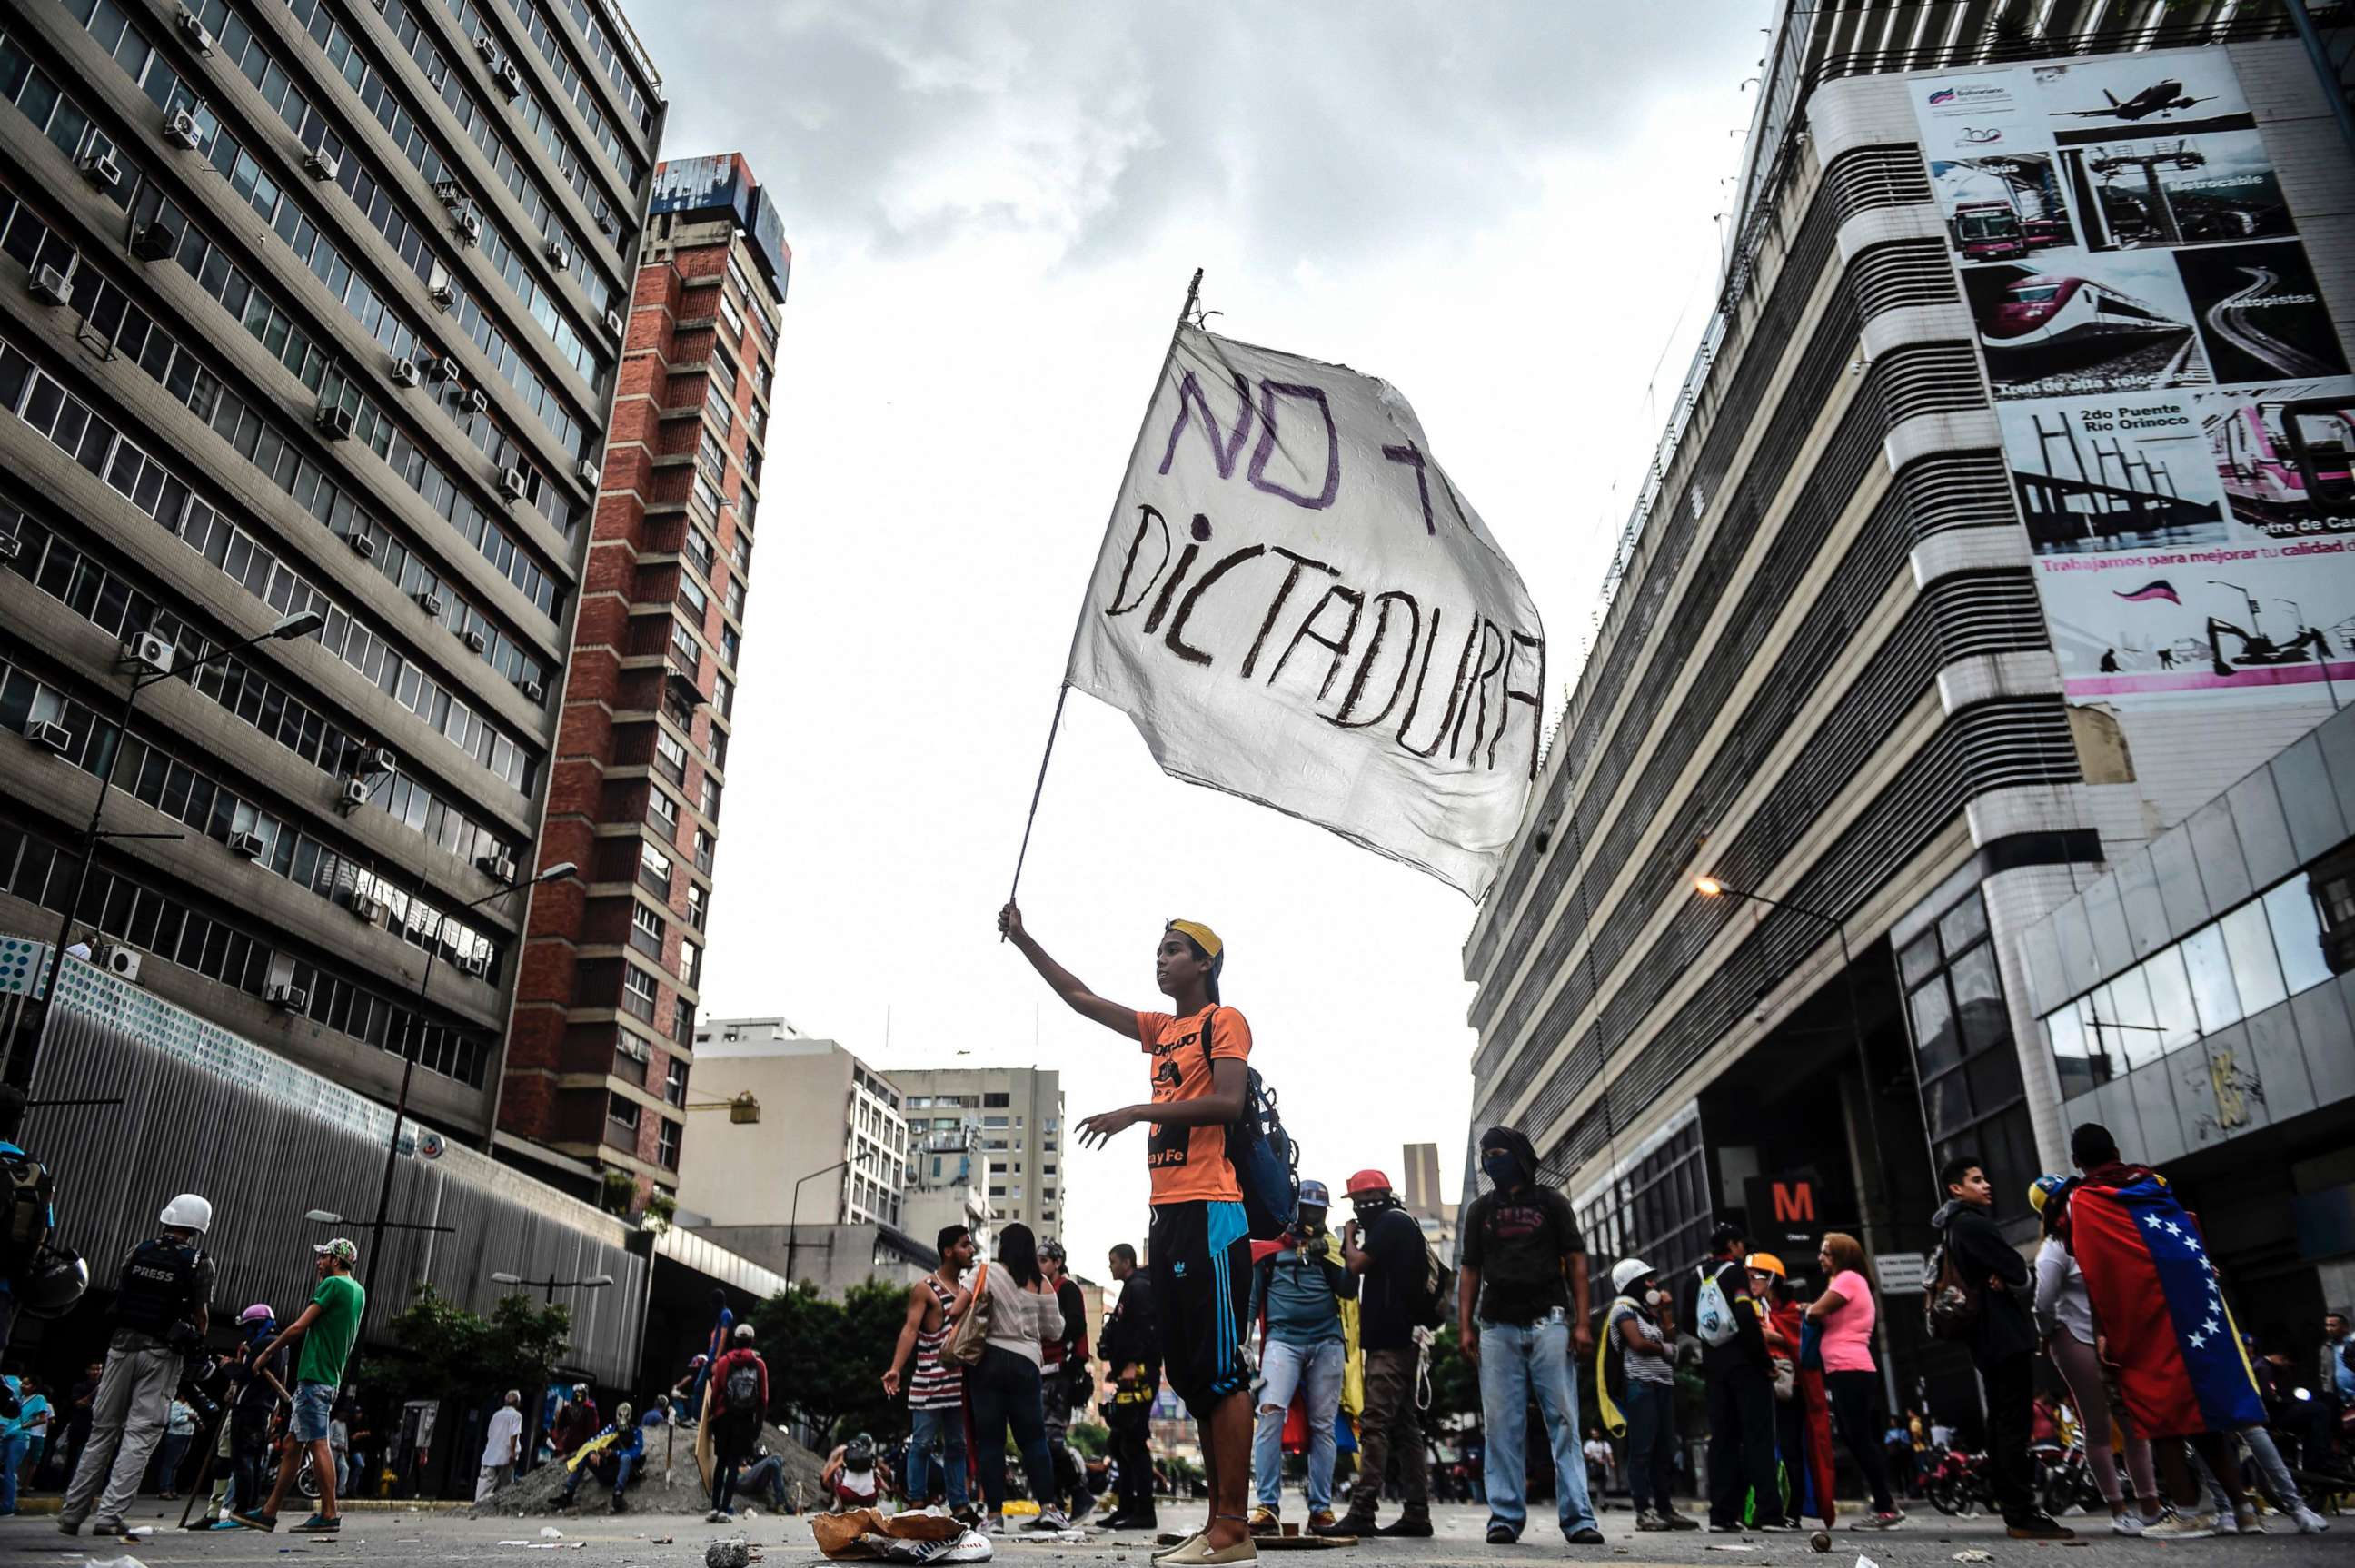 PHOTO: An opposition activist holds a flag reading "No more dictatorship" during a blockade to protest against Venezuelan President Nicolas Maduro in Caracas, July 18, 2017. 